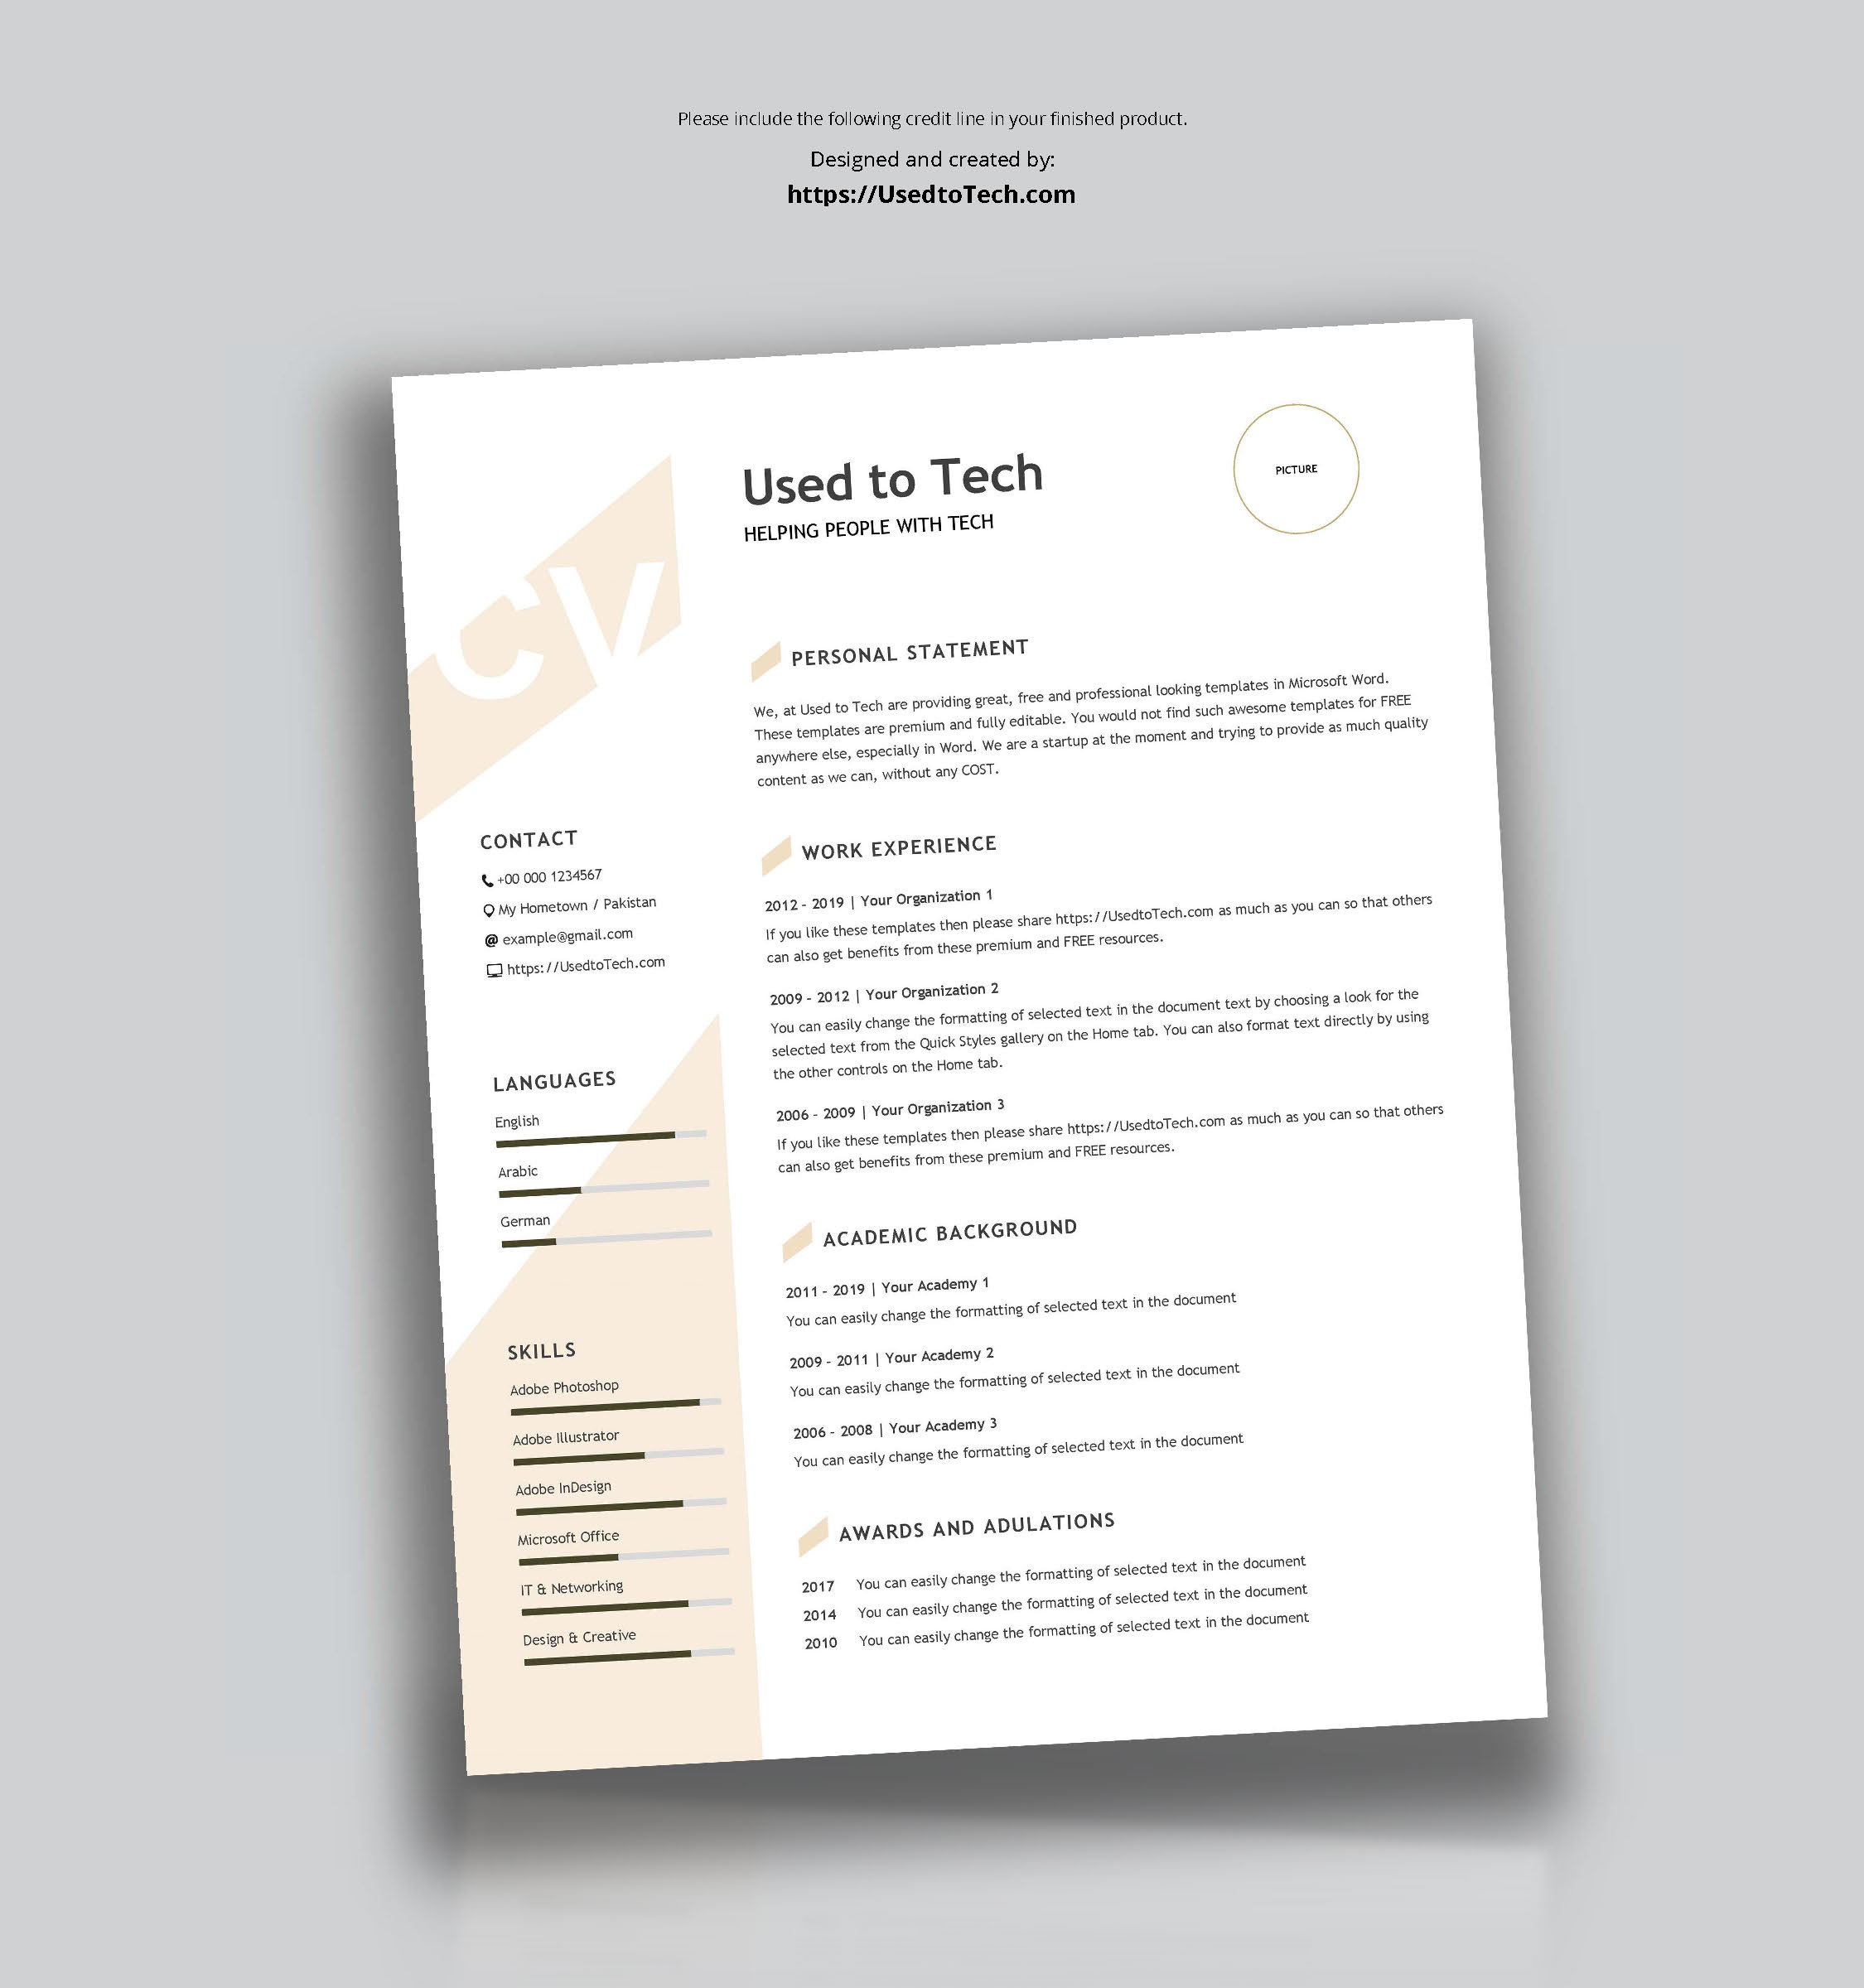 Modern Resume Template In Word Free - Used To Tech For How To Find A Resume Template On Word